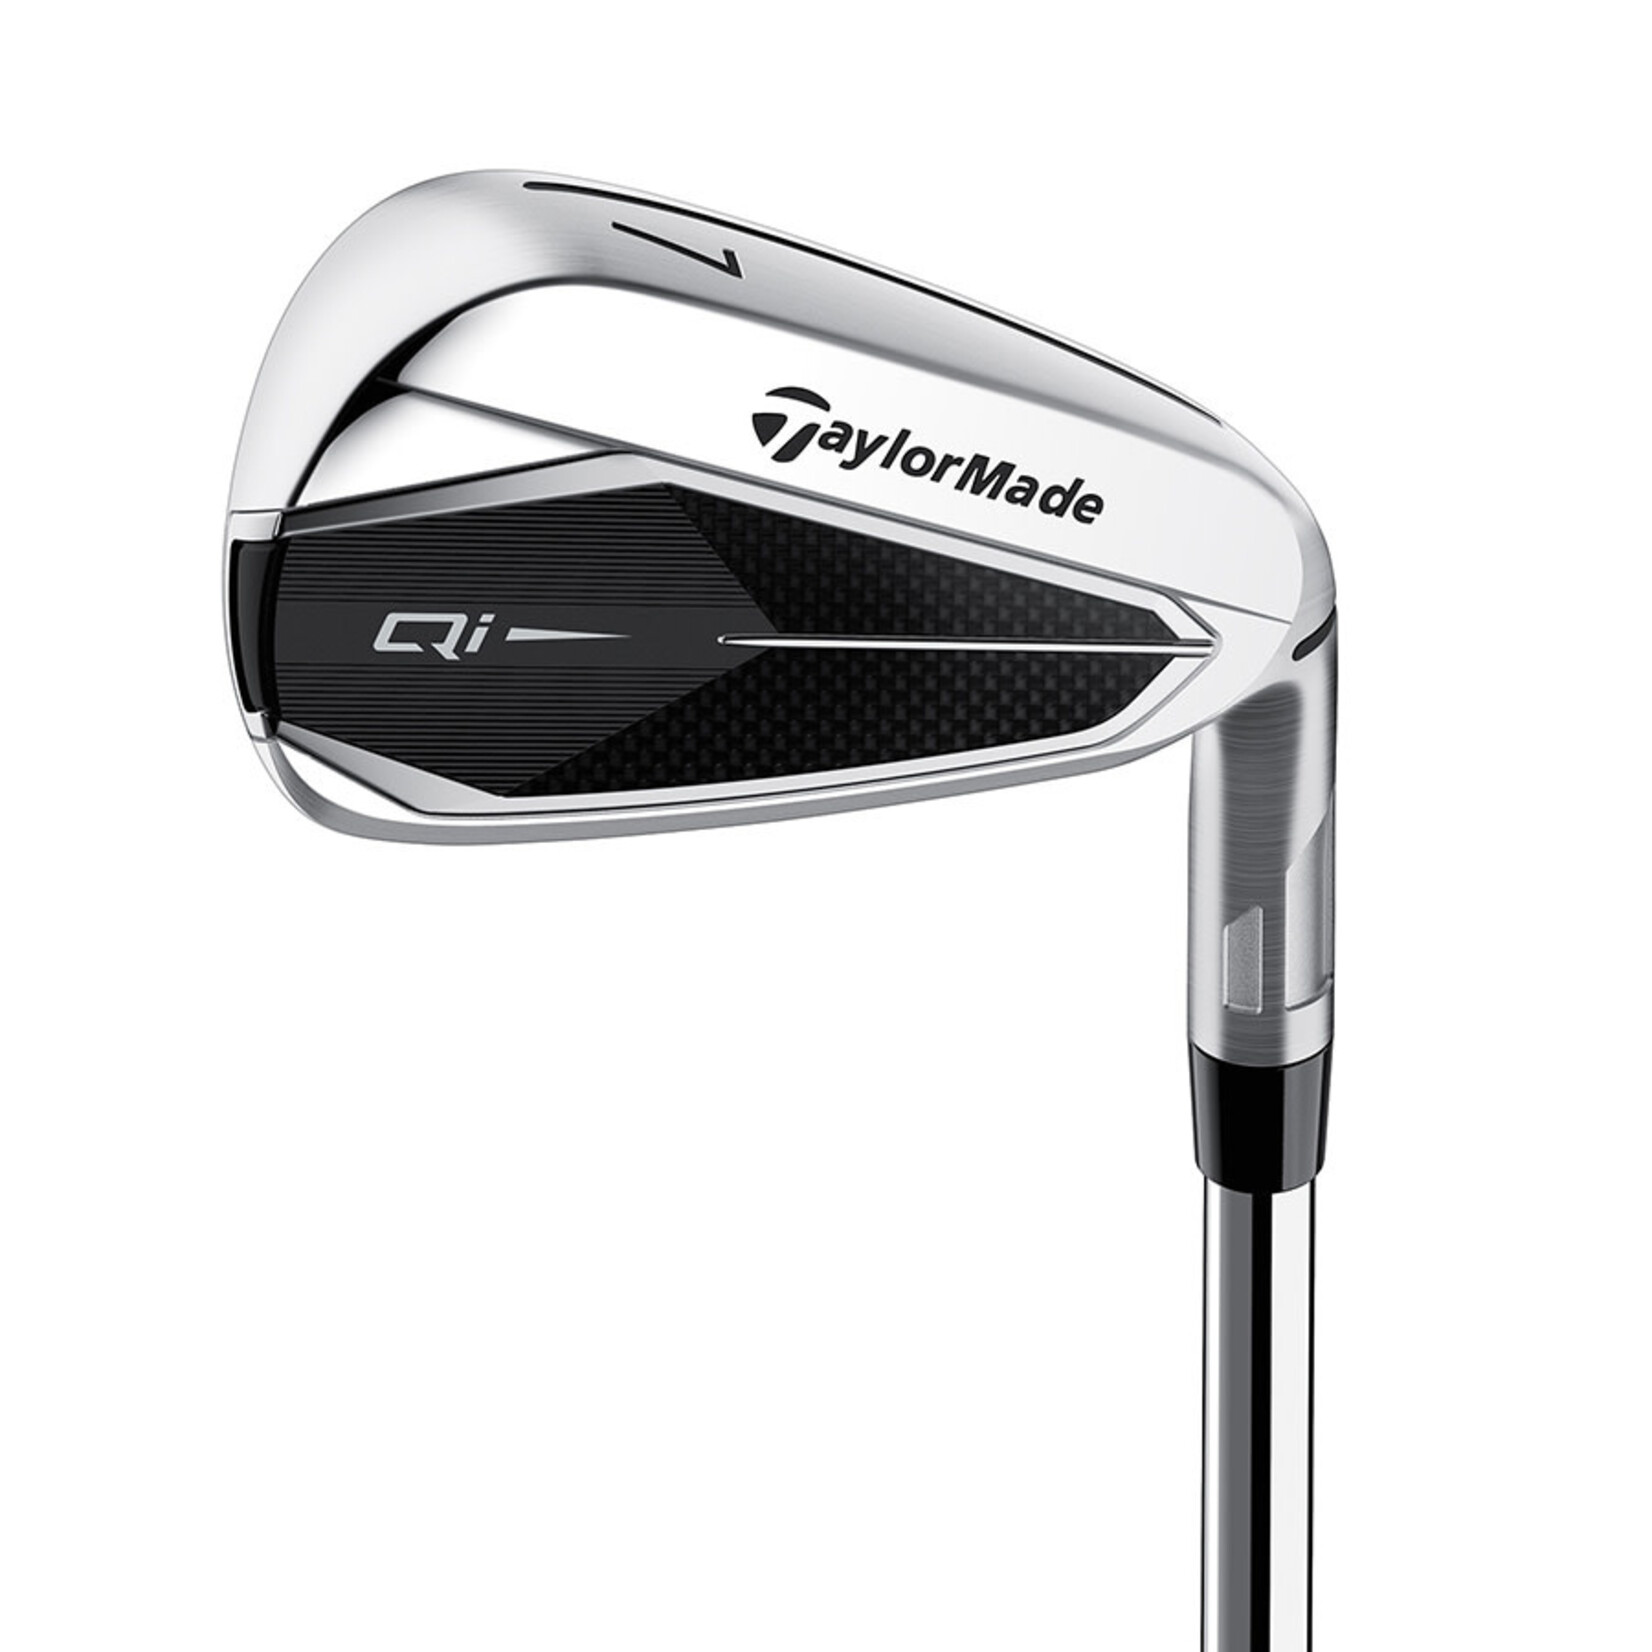 TAYLOR MADE Taylormade Qi10 Irons 5-PW+AW+SW RH Stiff Steel